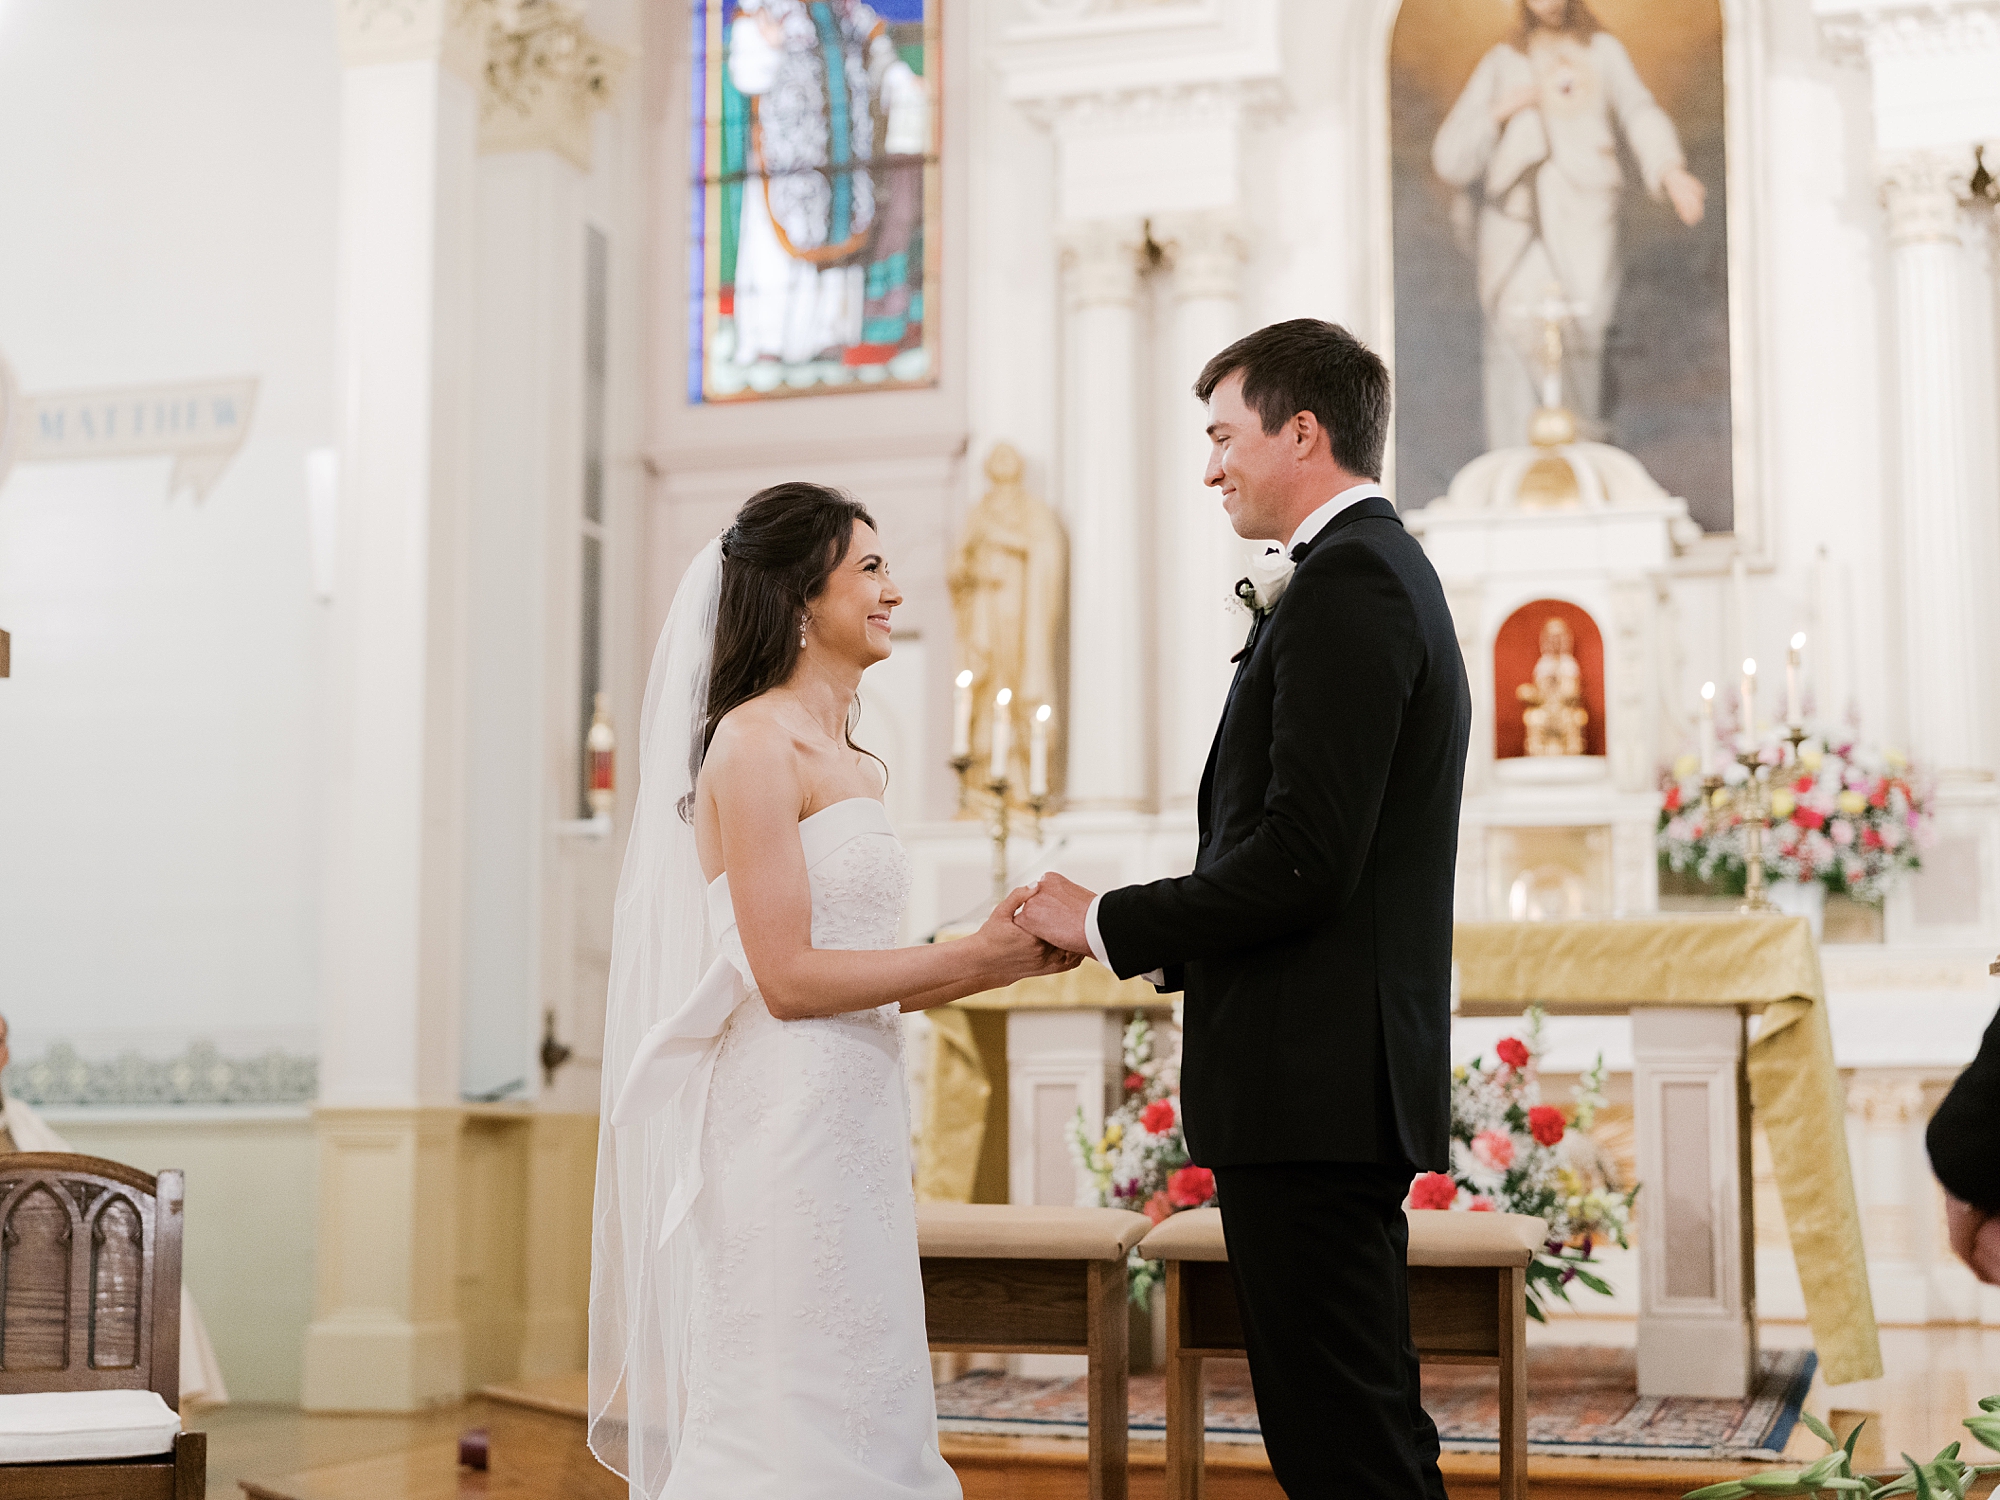 bride and groom stand together during traditional catholic wedding ceremony inside St. Charles Borromeo